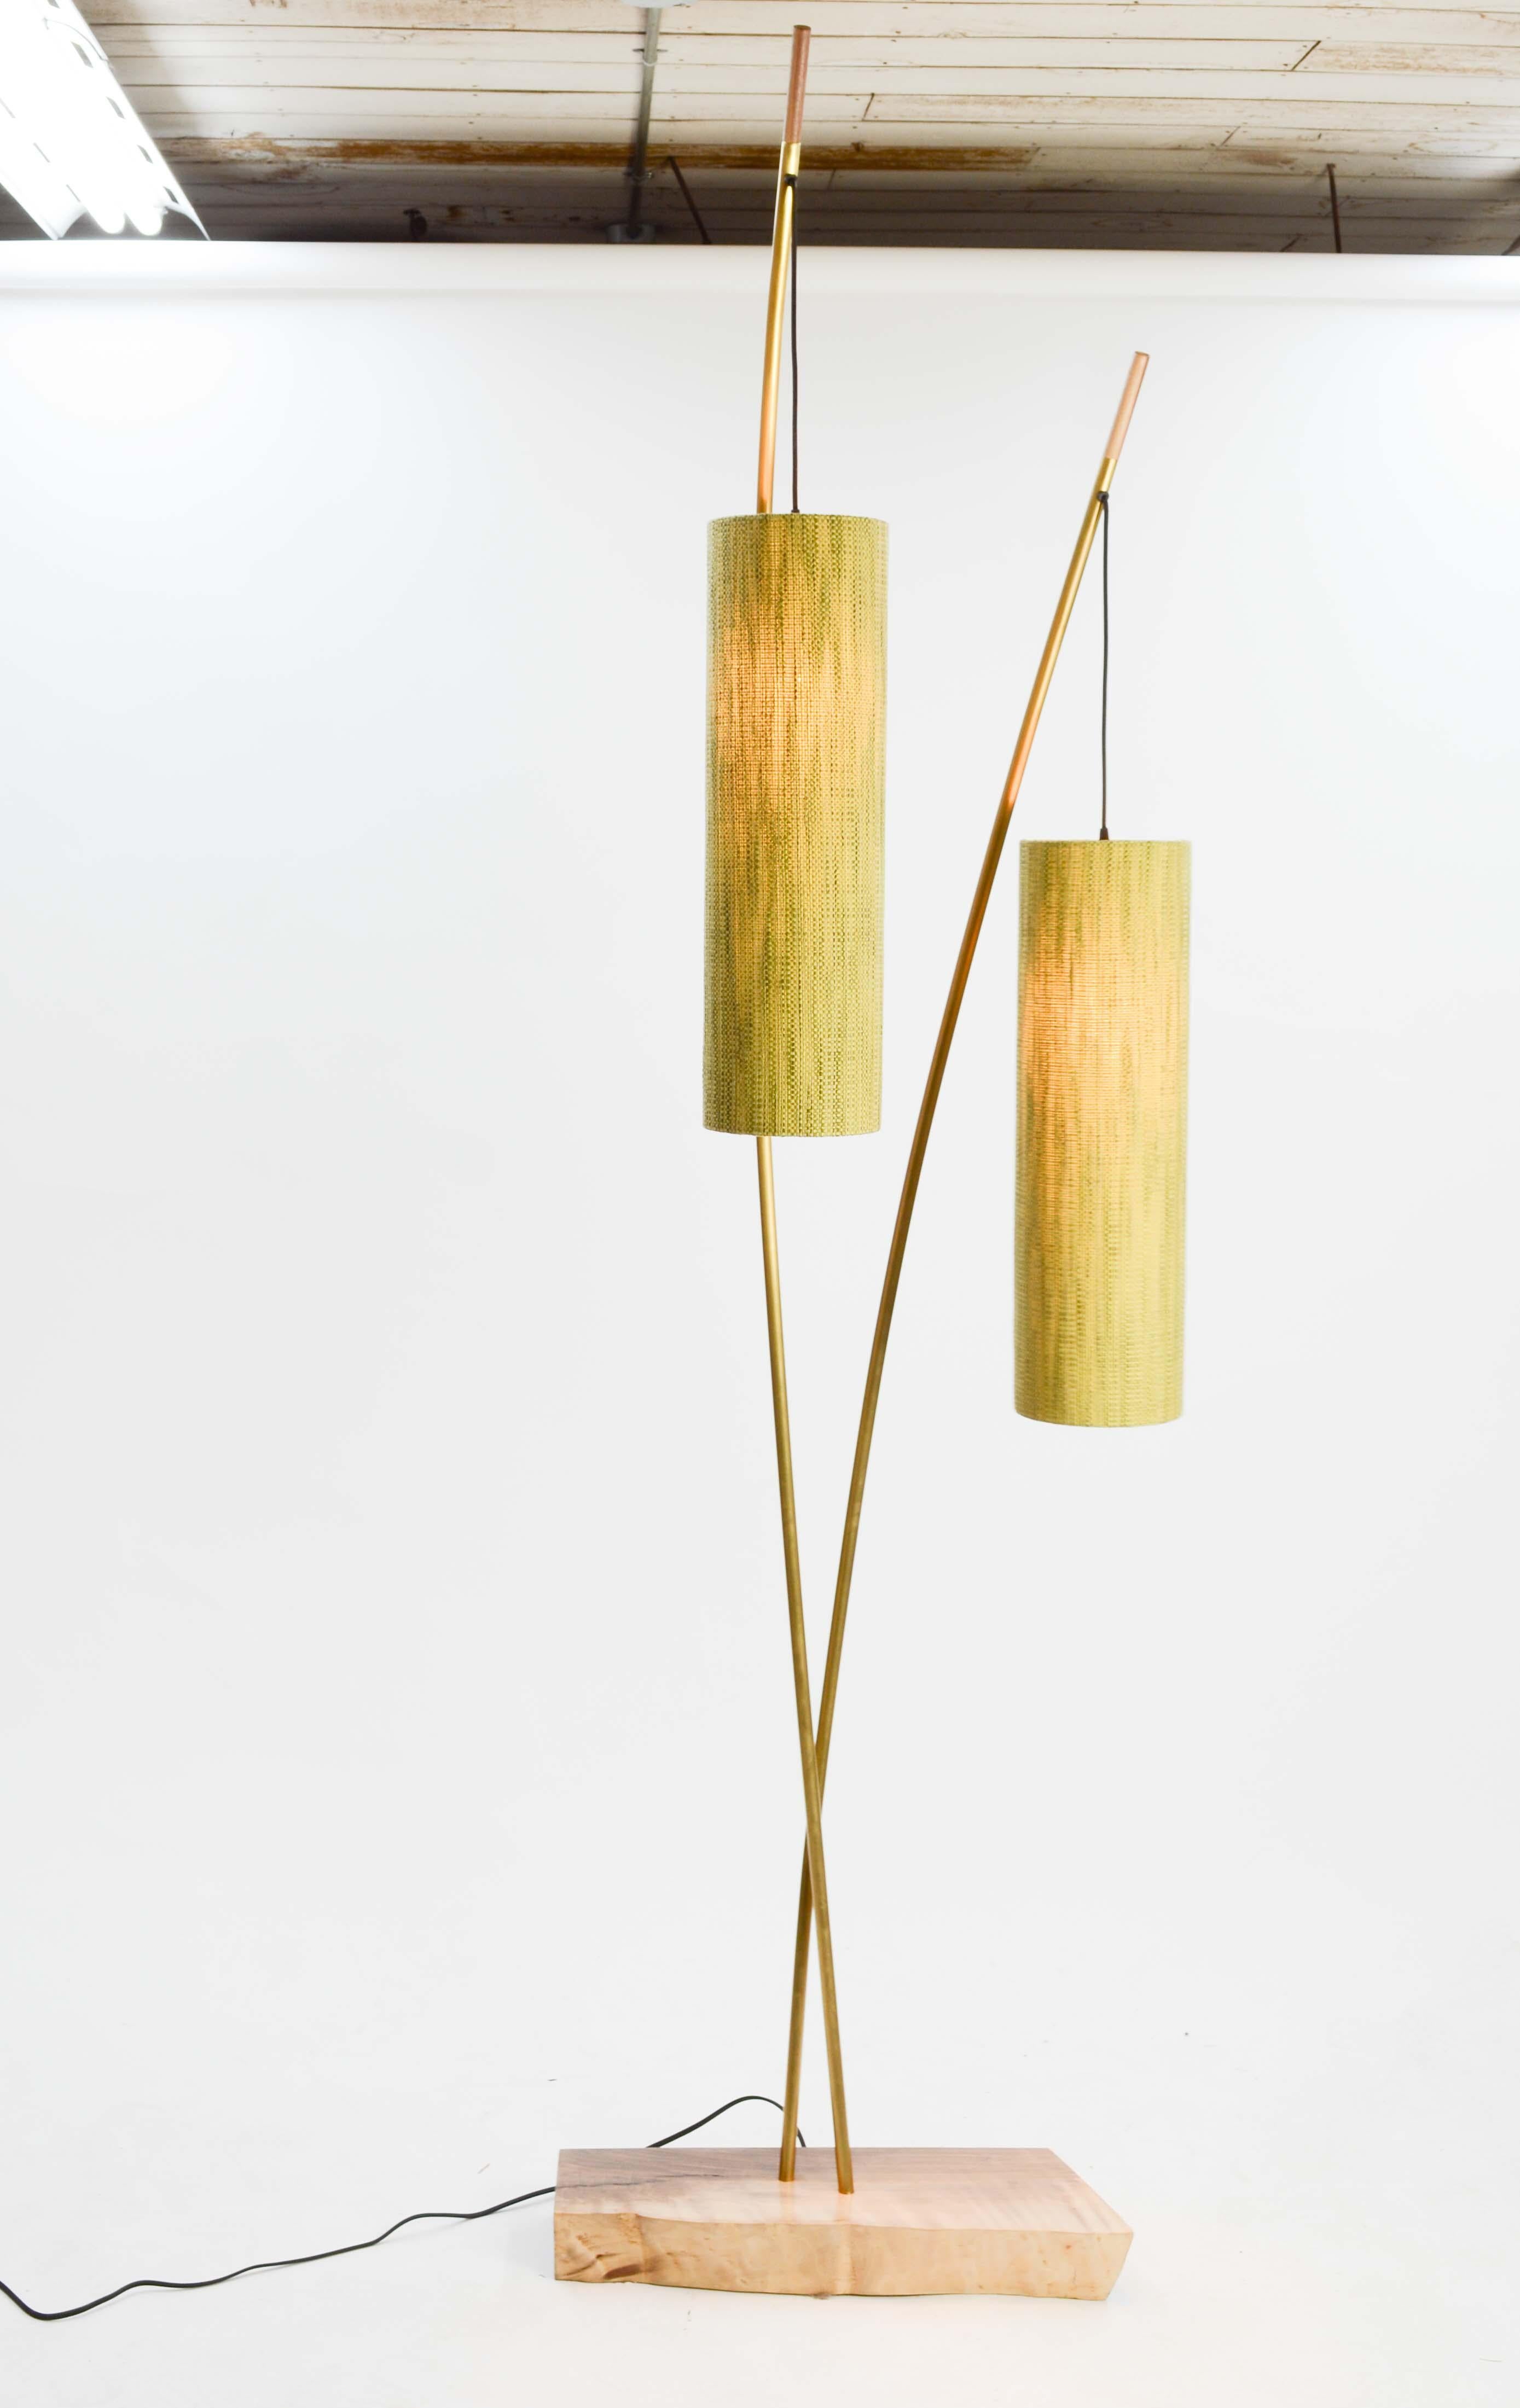 A stunning floor lamp by lighting artisan Jamie Violette of the Oregon wine country. This light is variable in it's width and the upright copper stem can rotate inward and outward to 180 degree range. This lamp brings the elements of nature inside